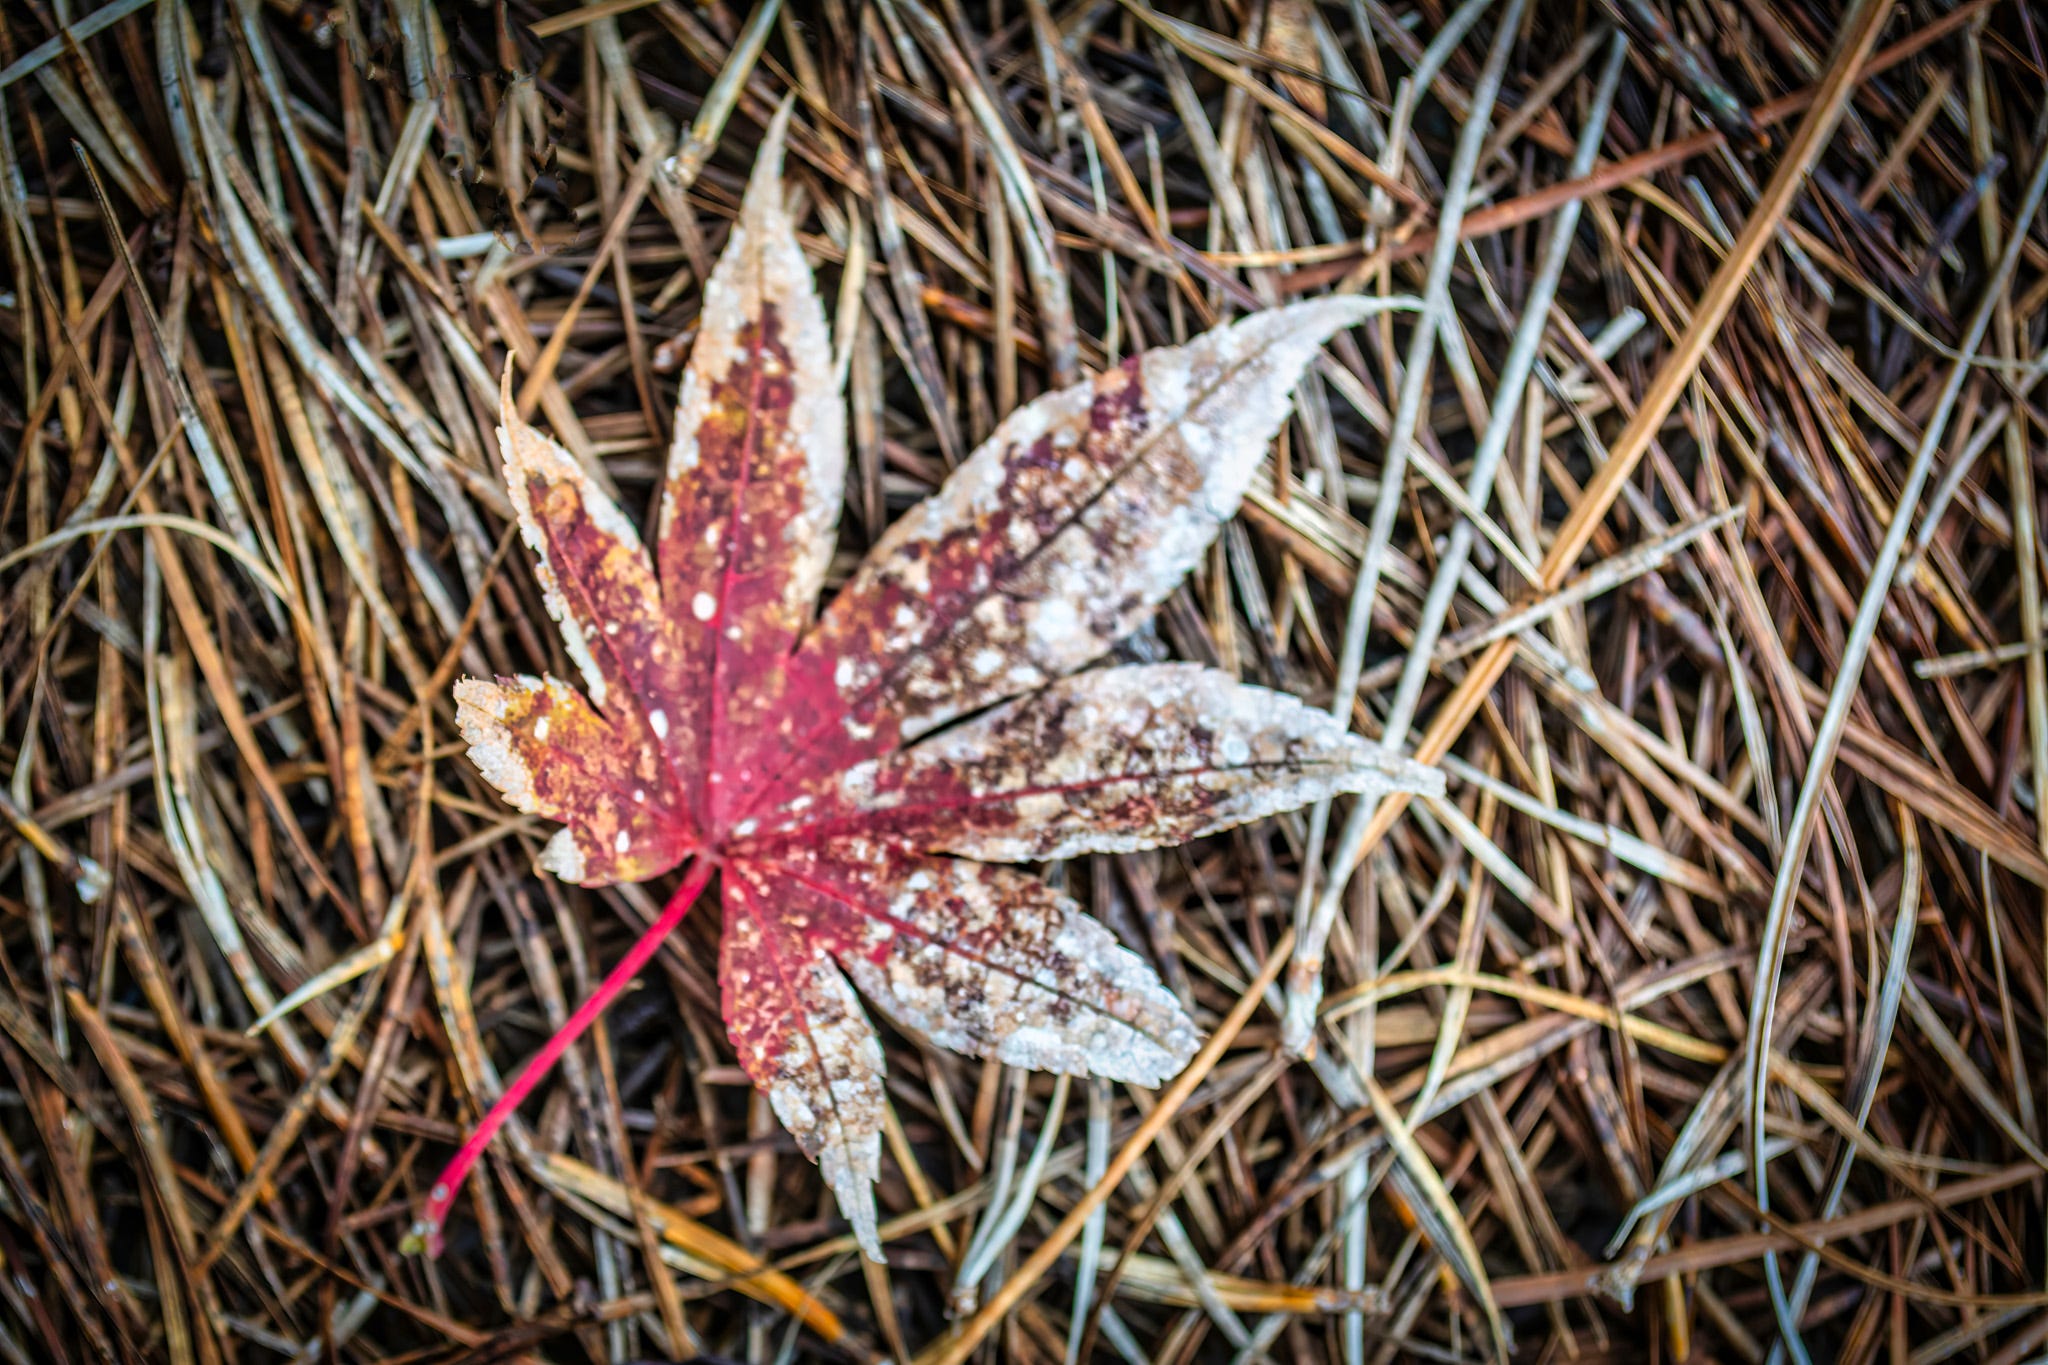 The edges of a single red oak leaf lying in a nest of pine needles have faded giving it a speckled effect.